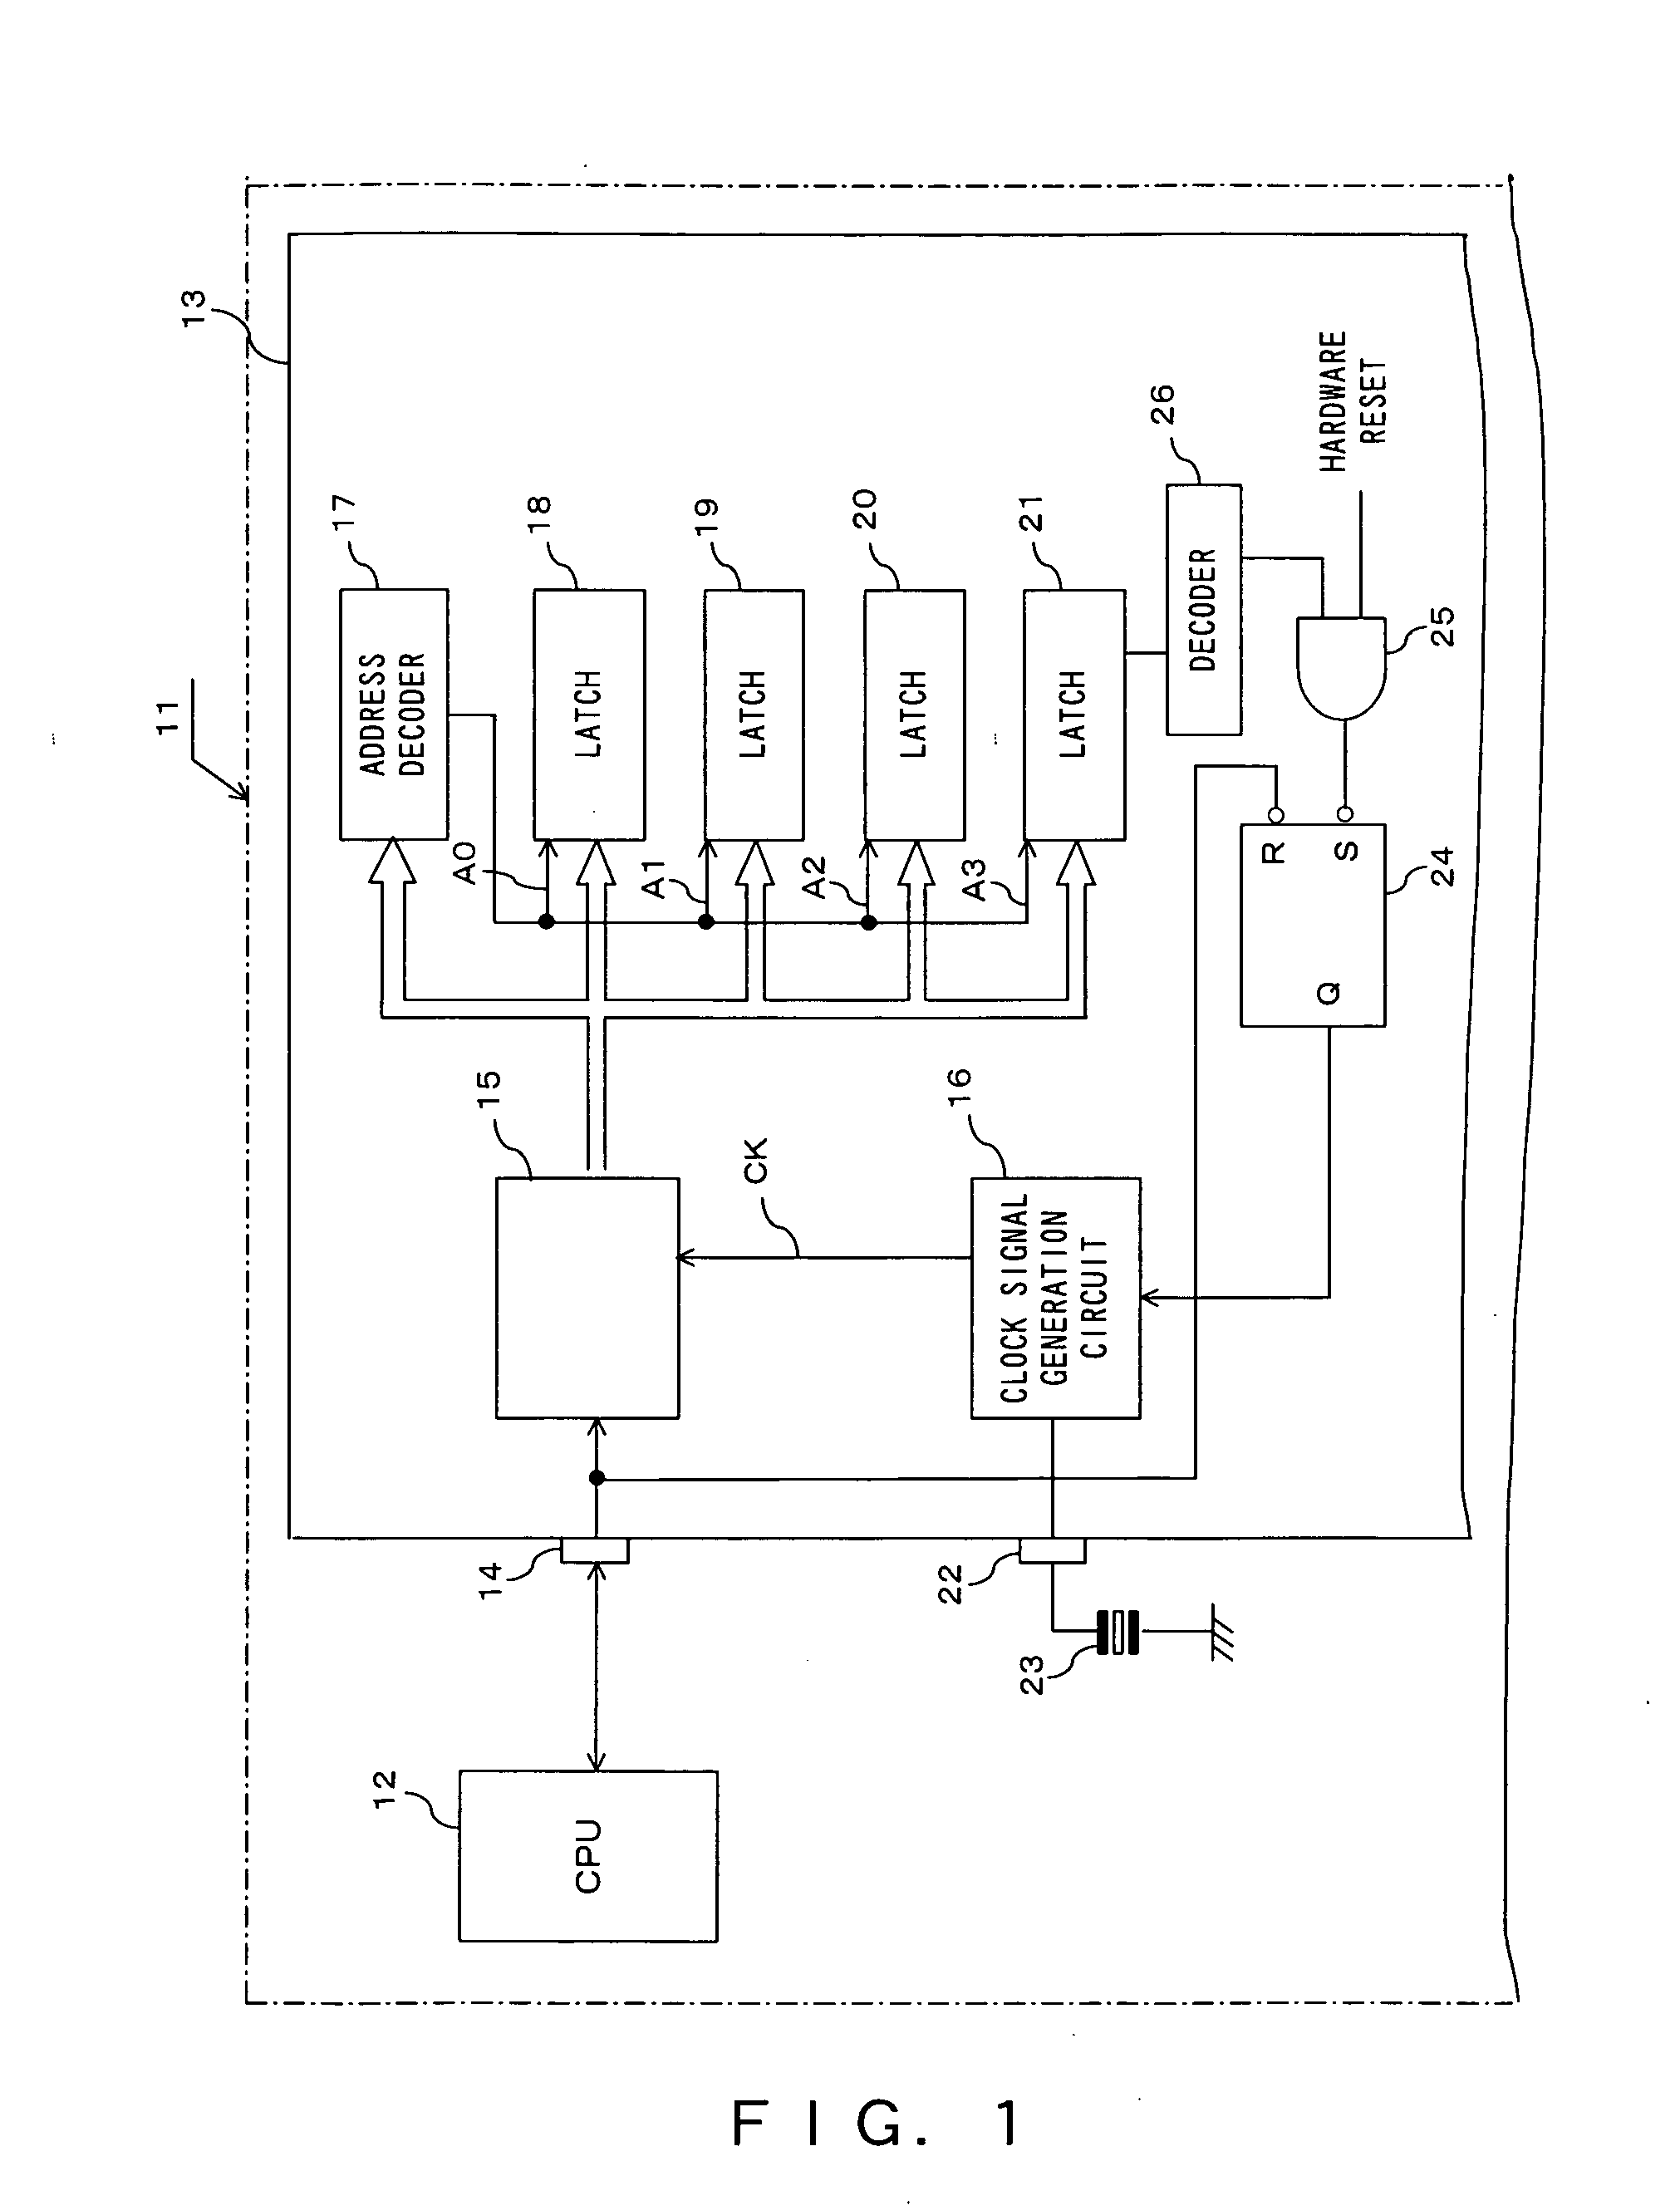 Start-stop synchronization serial communication circuit and semiconductor integrated circuit having start-stop synchronization serial communication circuit